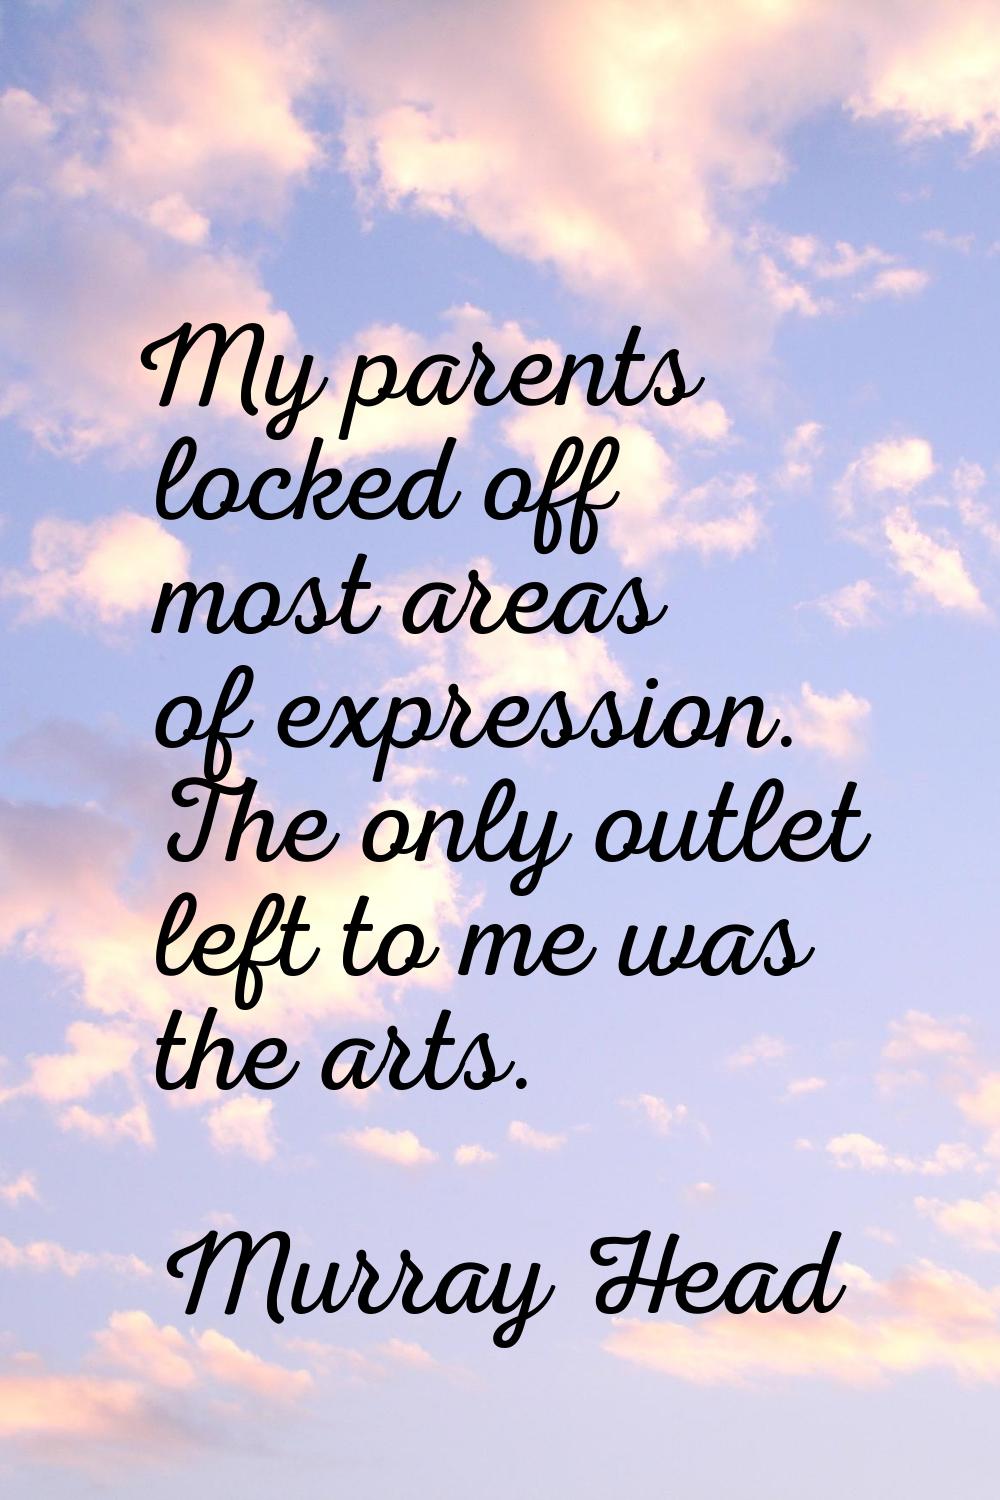 My parents locked off most areas of expression. The only outlet left to me was the arts.